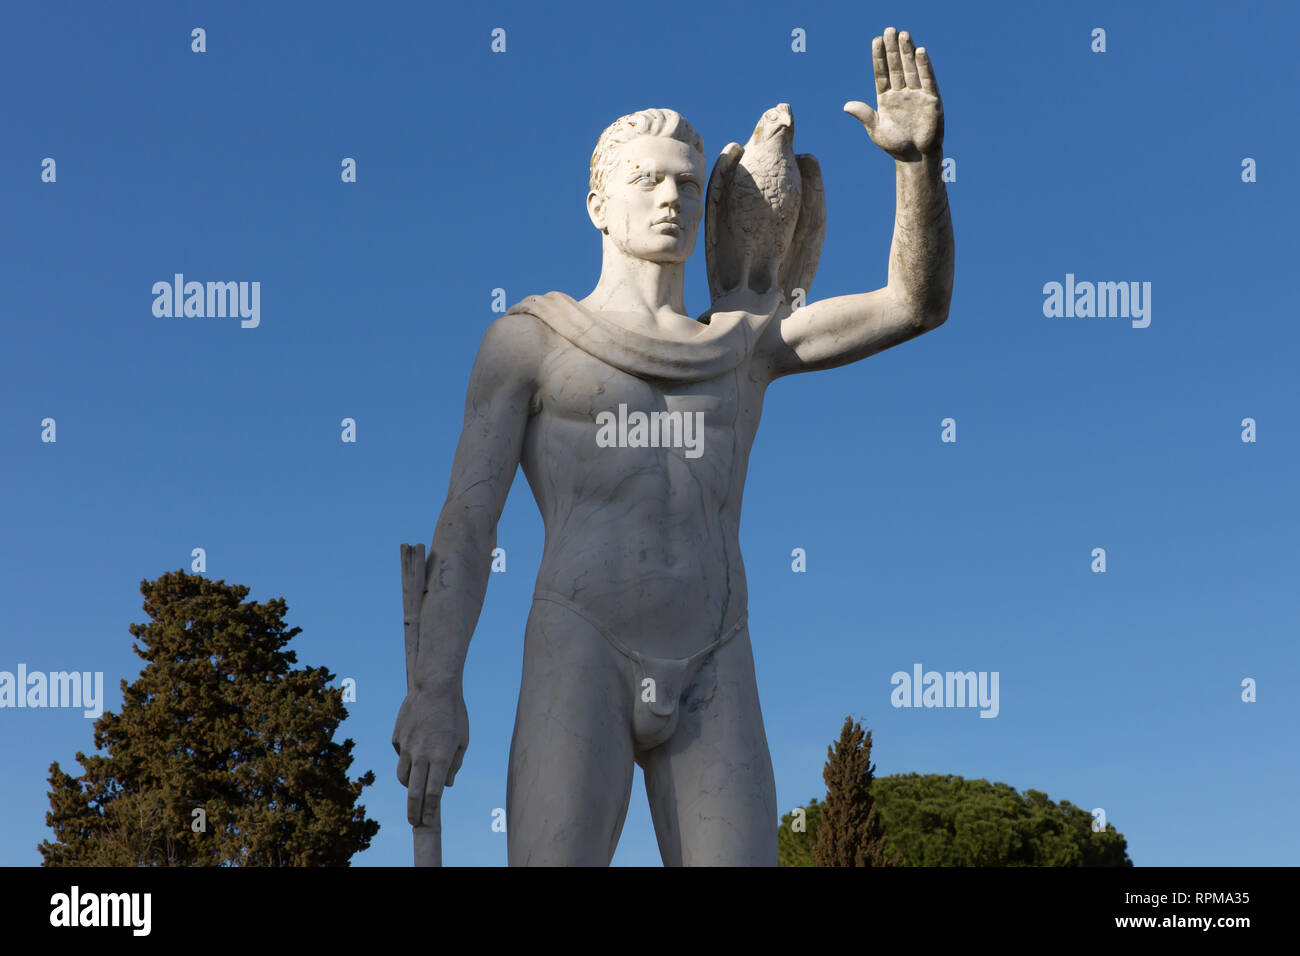 ROME - Marble statue at the tennis courts to the Foro Italico. The sports complex formerly known as the Foro Mussolini was built in the fascist era. Stock Photo